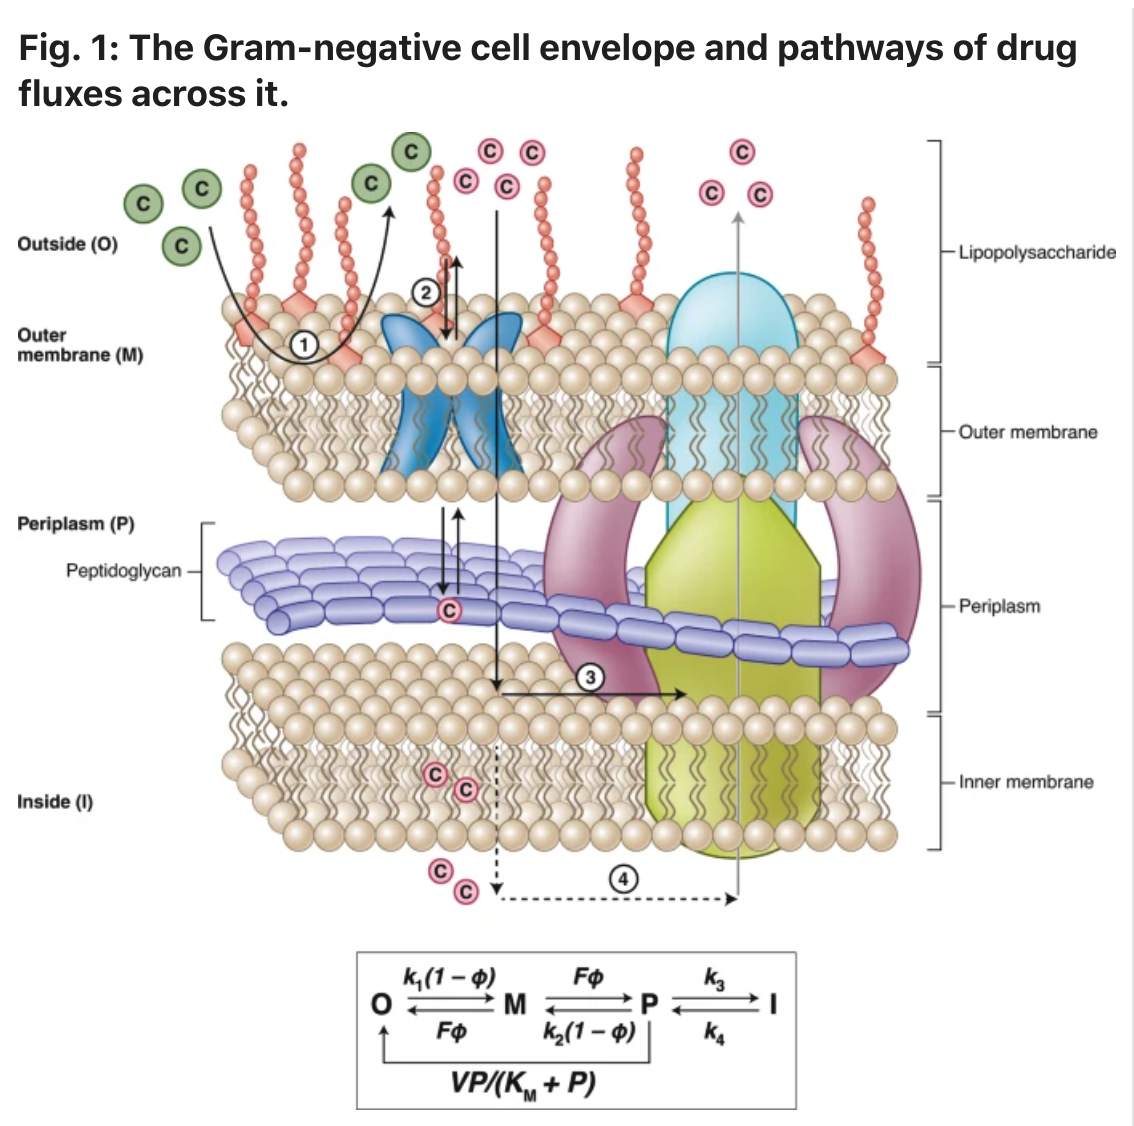 Gram-negative cell envelope and pathways of drug fluxes across it